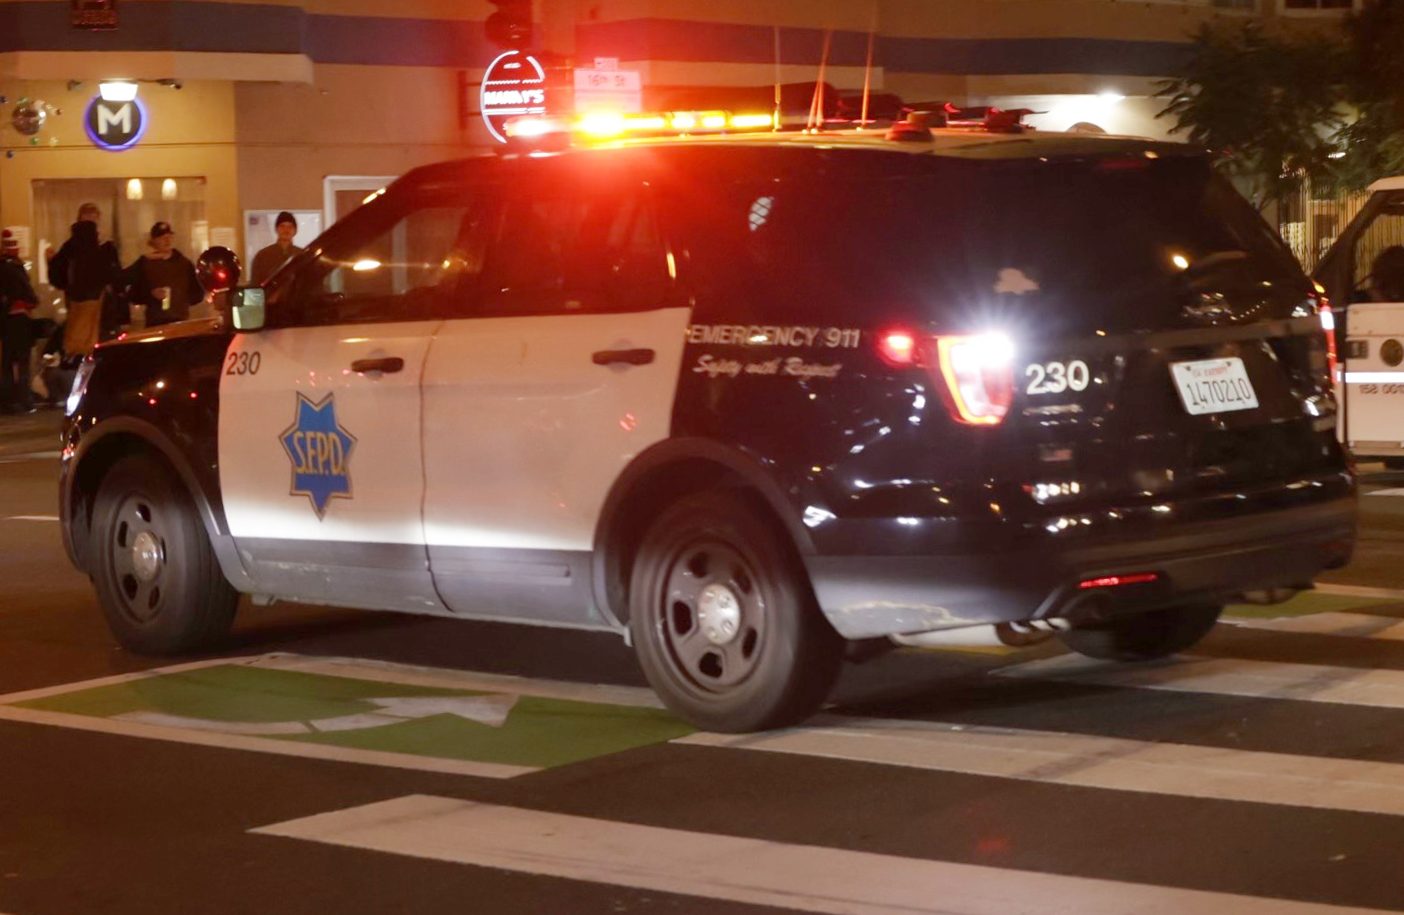 A police SUV with a lit siren is parked on a city street corner at night. The vehicle has "SFPD" on the side, and people are gathered in the background.